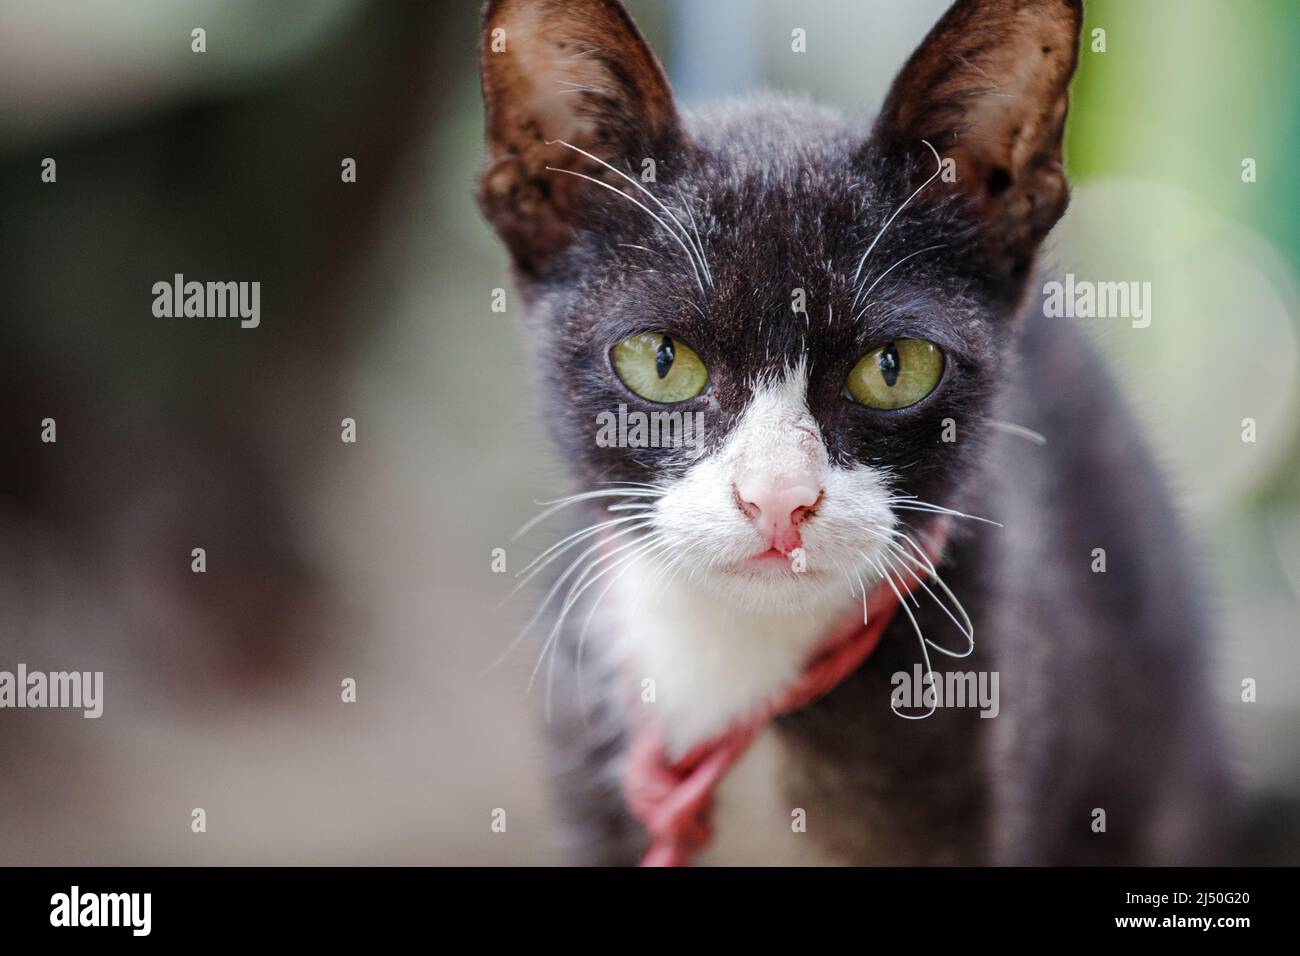 Portrait of black and white cat with green eyes Stock Photo